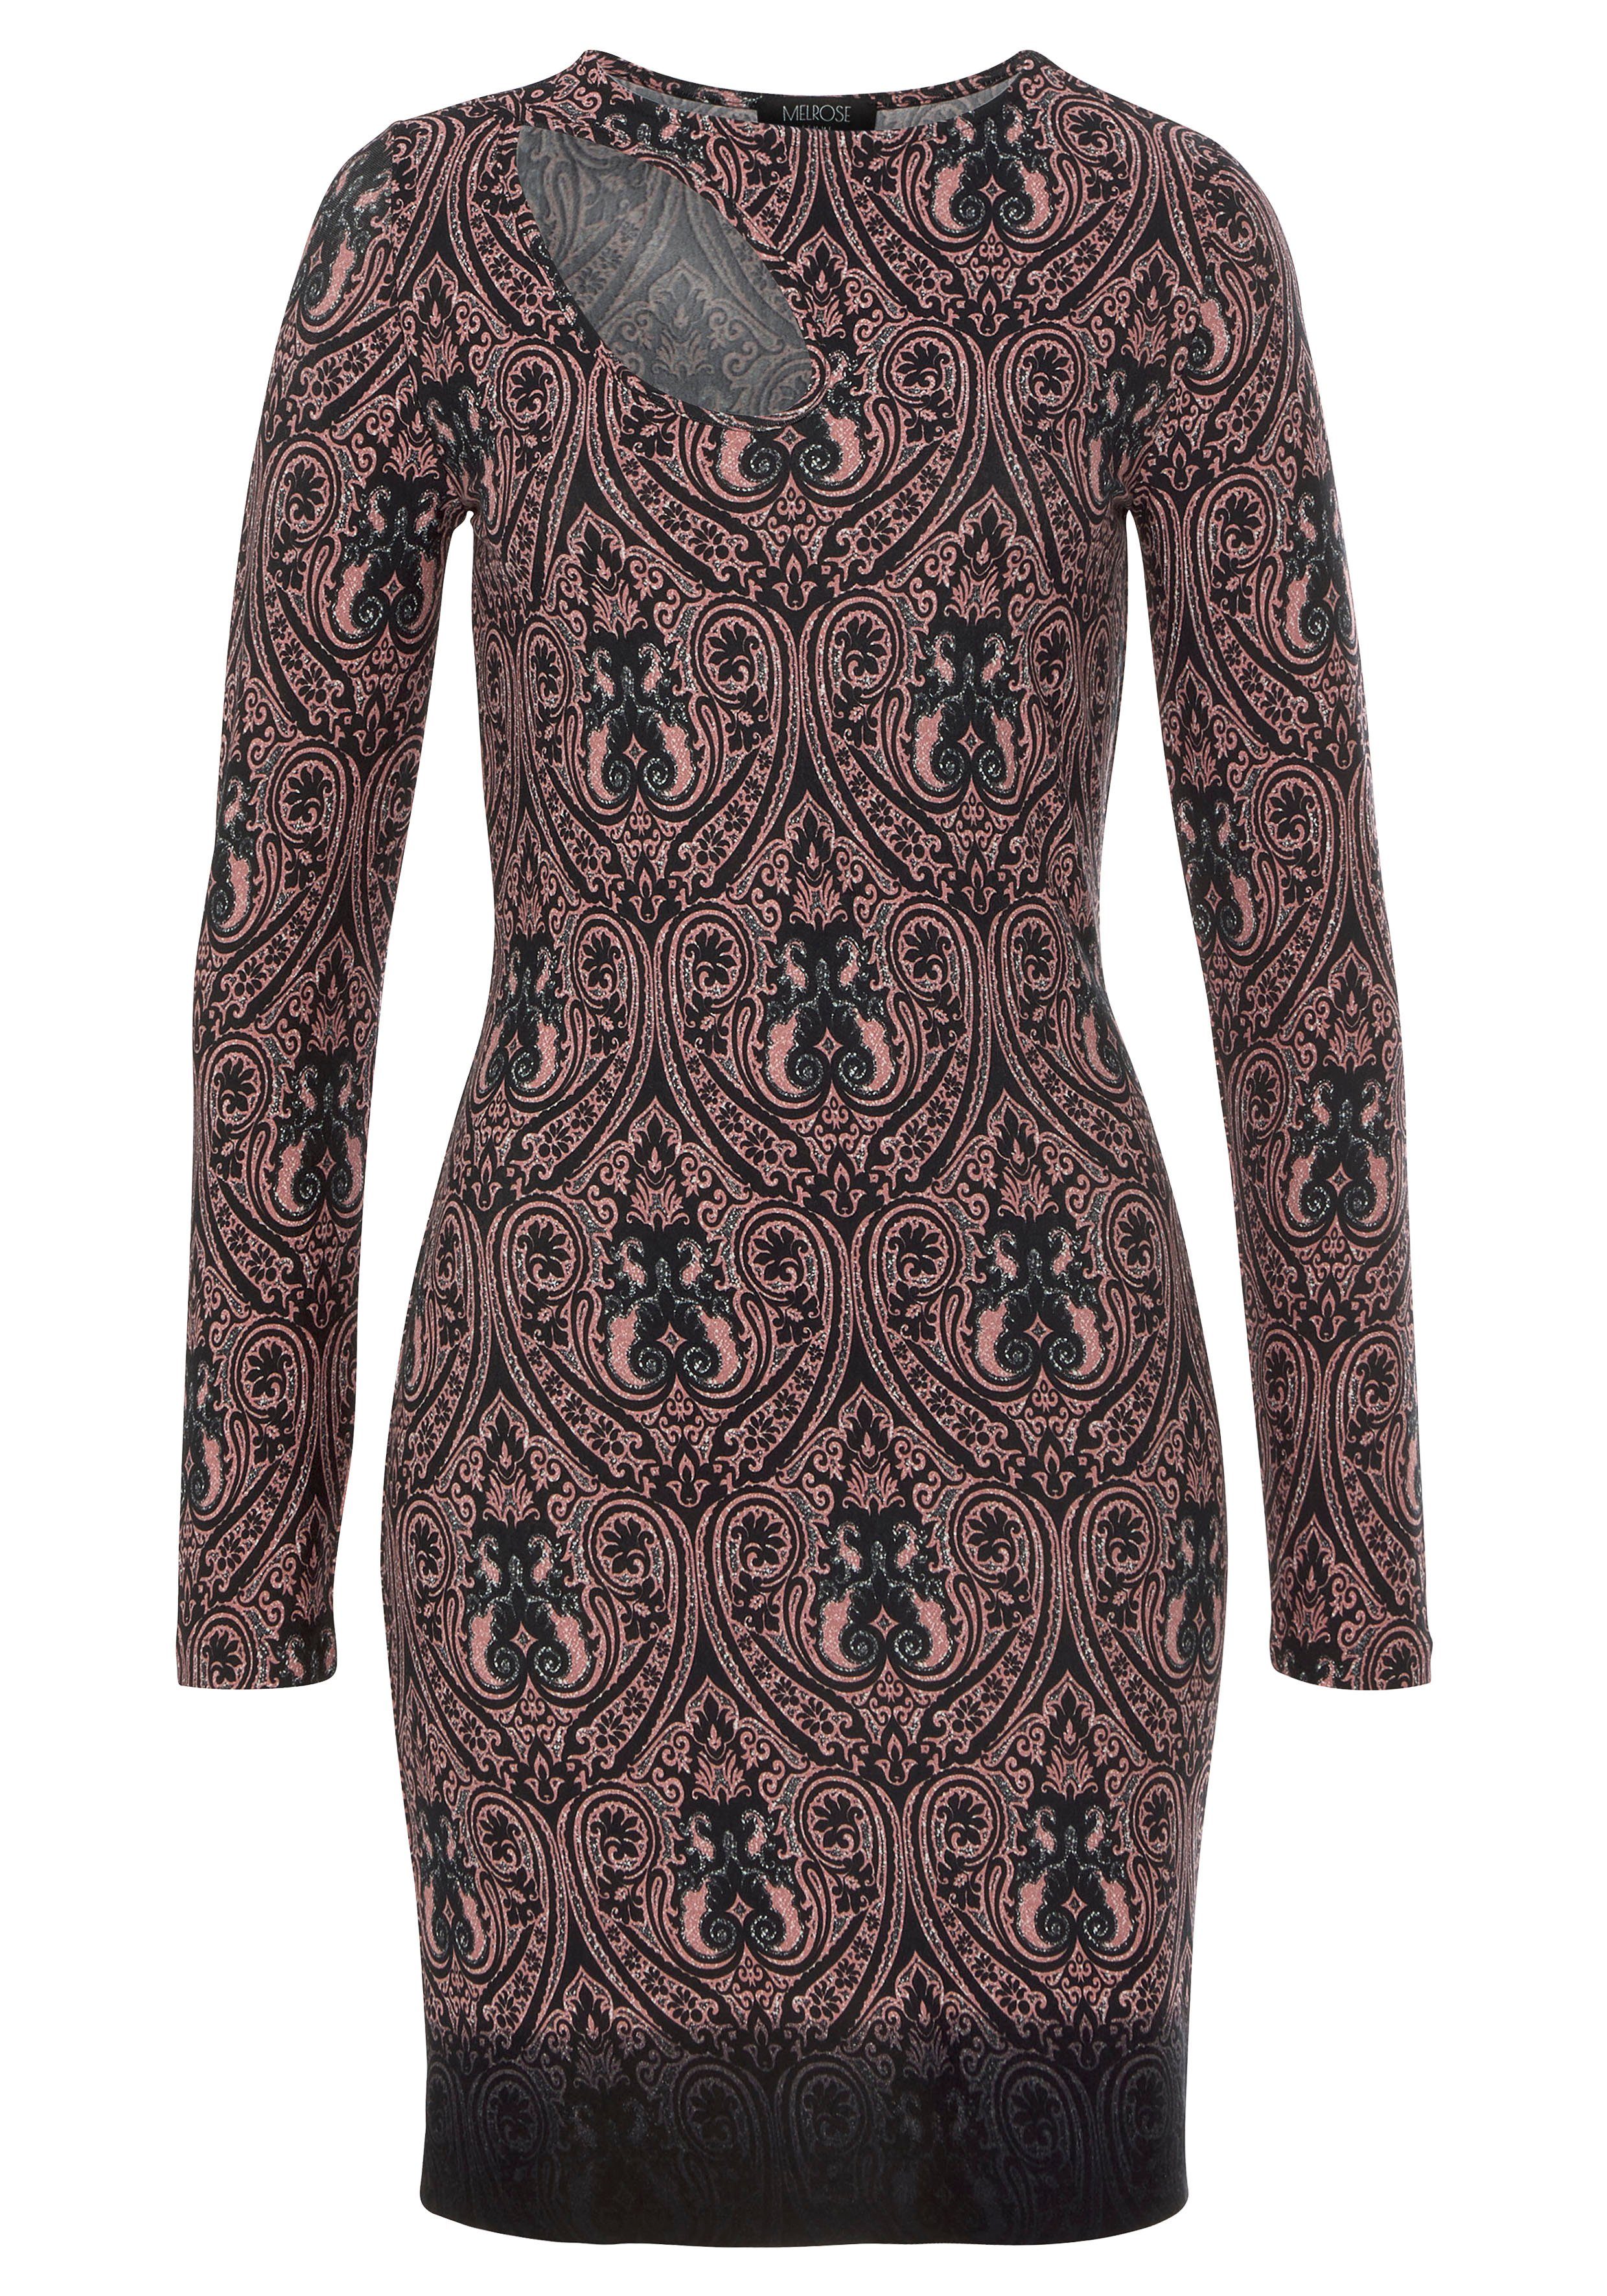 Paisley-Muster Cut-Out mit Jerseykleid Melrose und